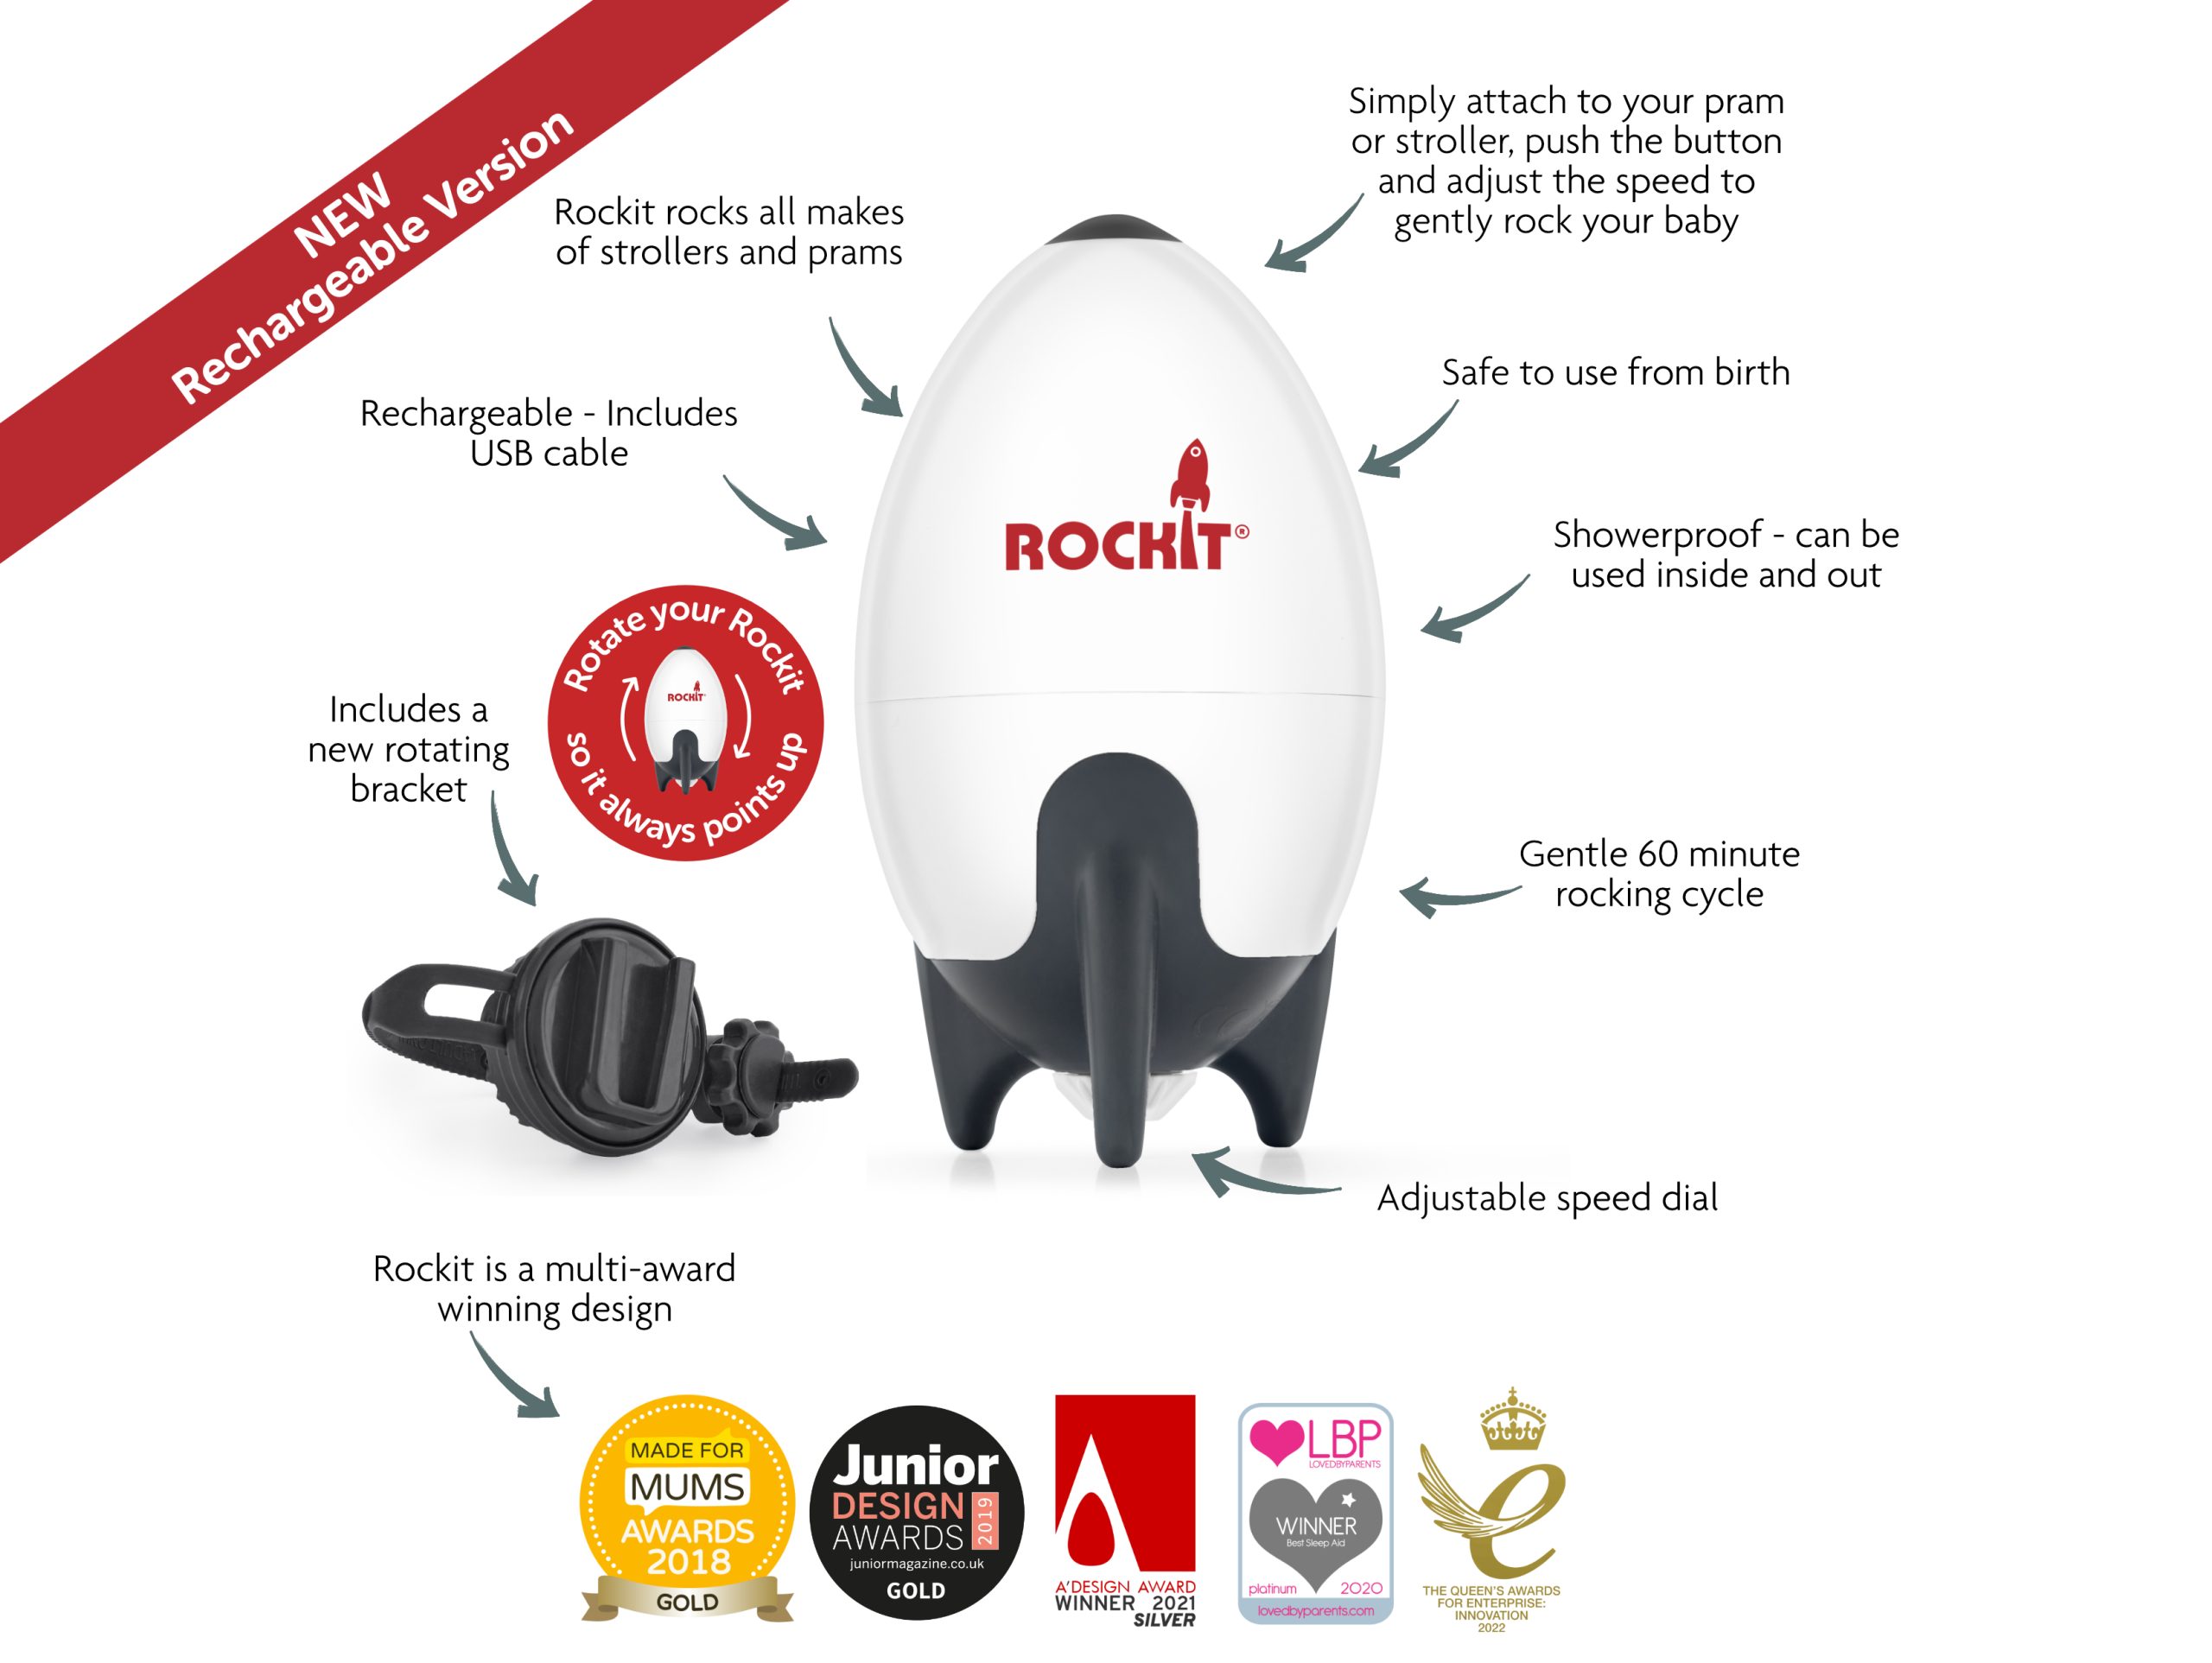 Rockit feature diagram. Rocks all strollers. Attach to pram and push button to switch on. Use speed dial on bottom to adjust speed. Safe from birth. Showerproof. 60 minute Rocking cycle. New rotating bracket included. Rechargeable - USB cable supplied.